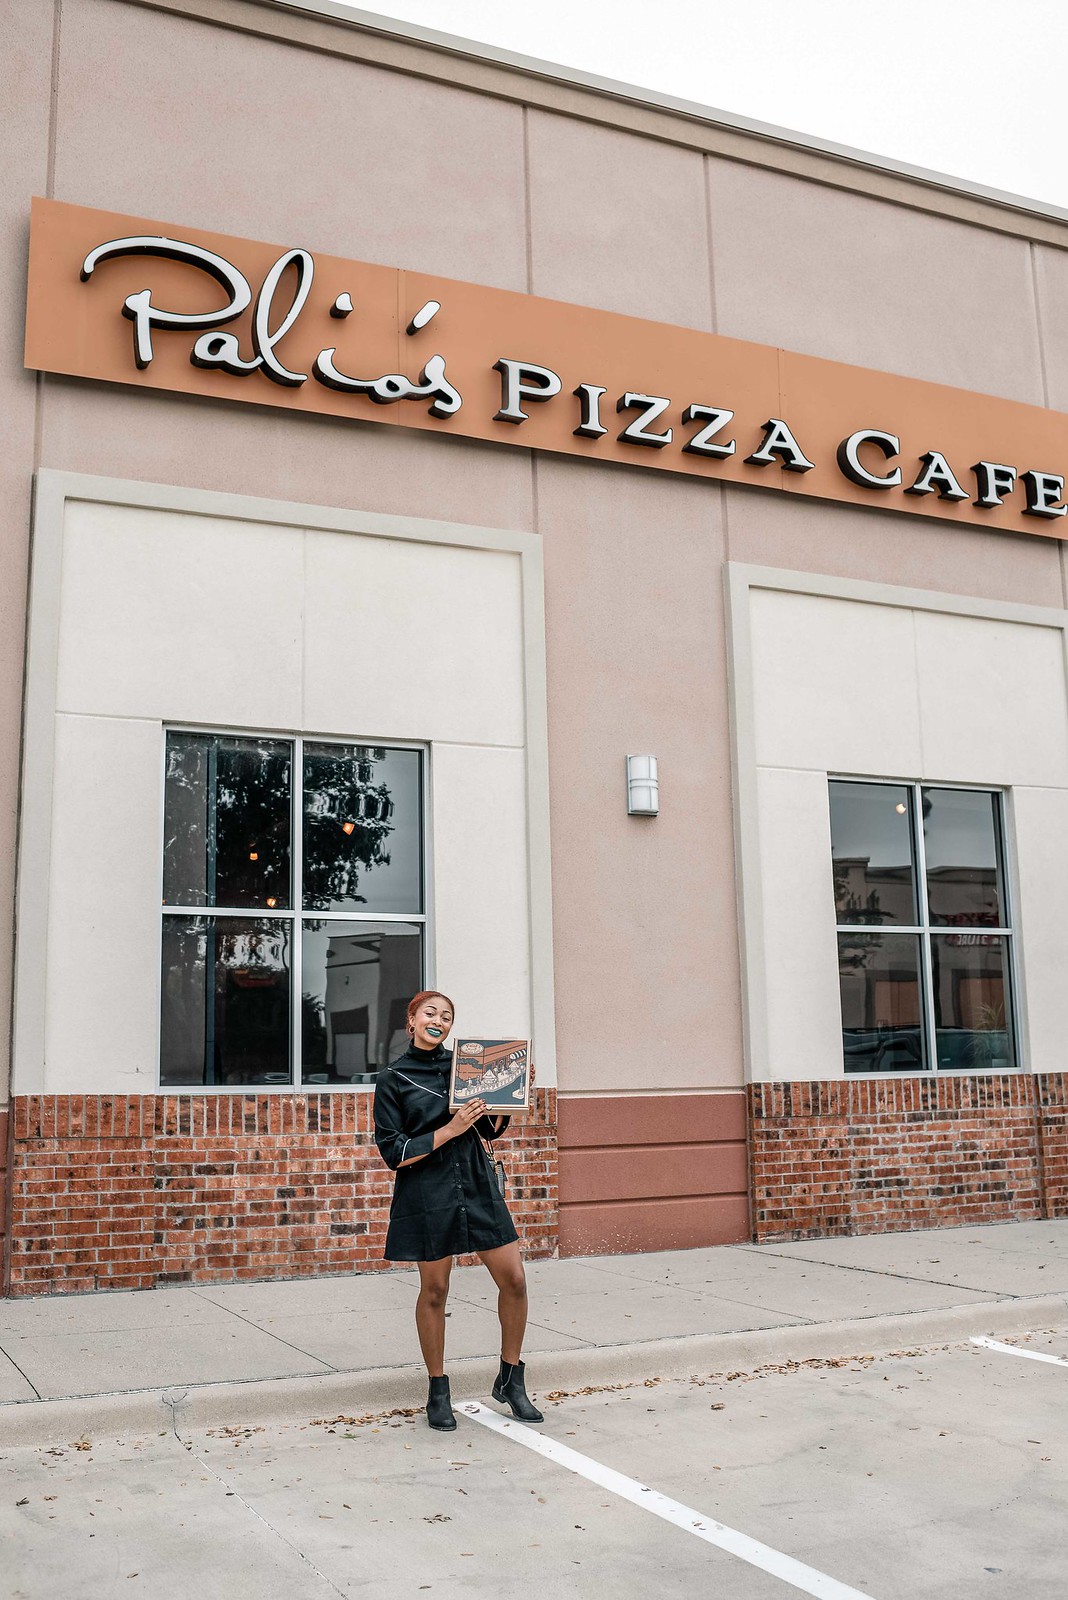 how to get cash back at palio's pizza cafe